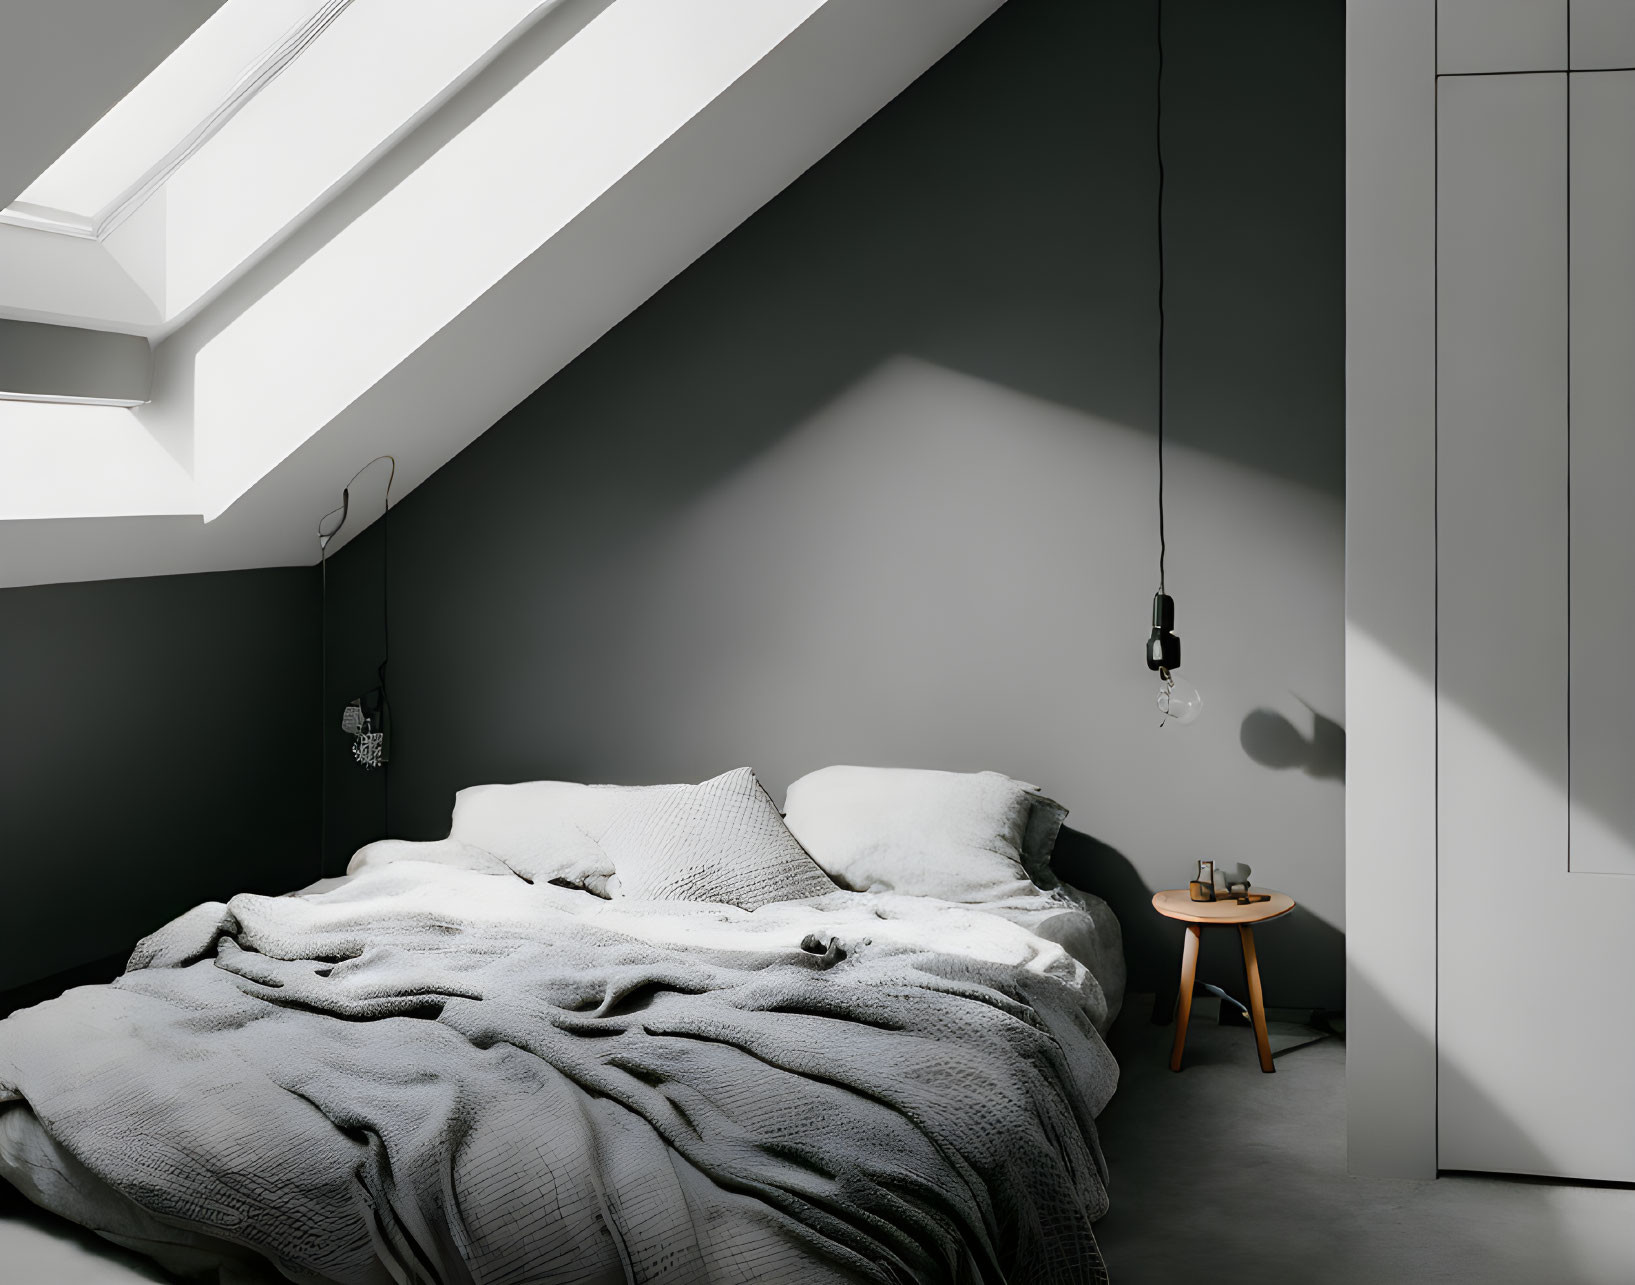 Unmade bed in minimalist bedroom with skylight and hanging bulbs